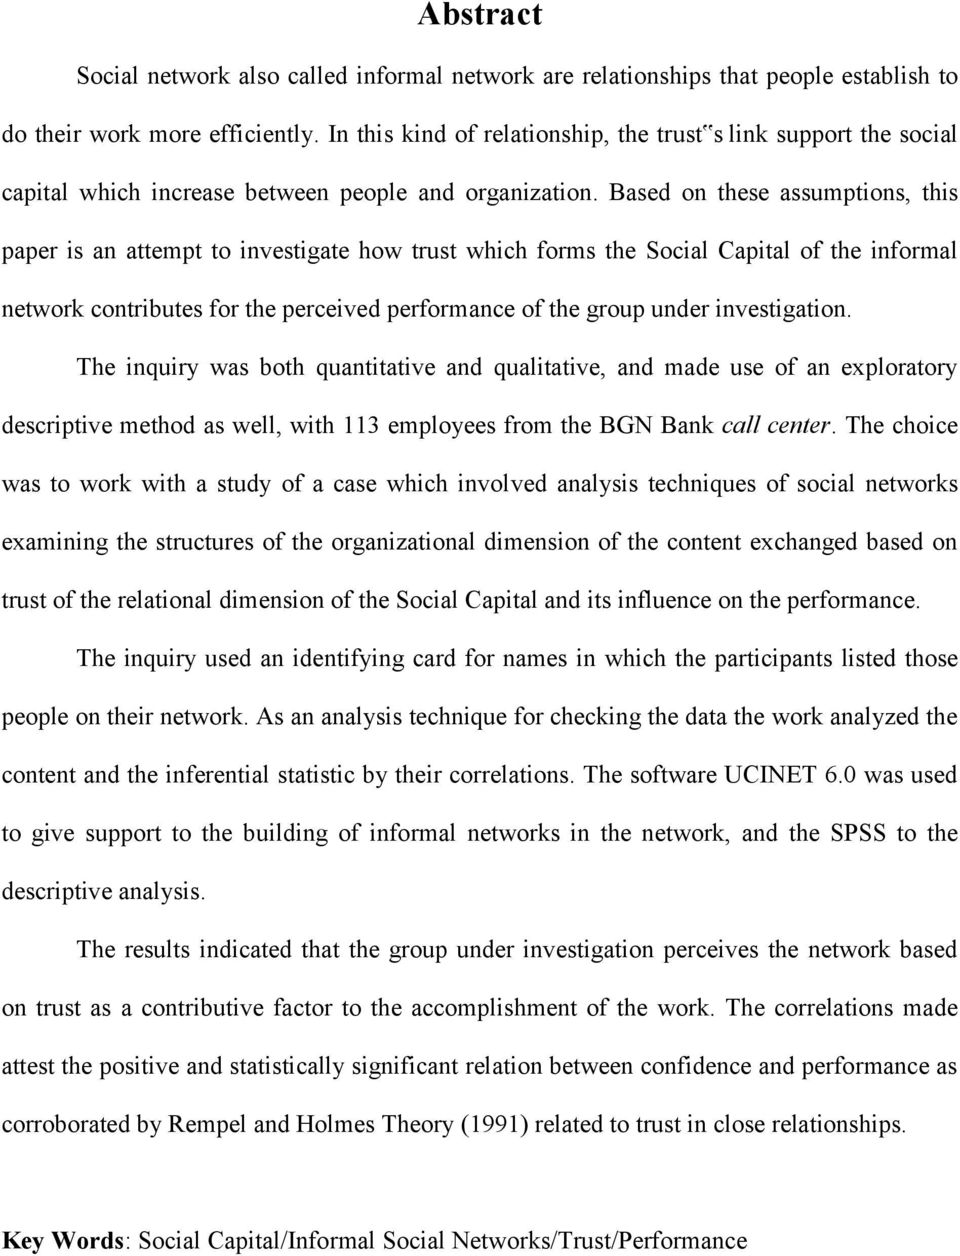 Based on these assumptions, this paper is an attempt to investigate how trust which forms the Social Capital of the informal network contributes for the perceived performance of the group under